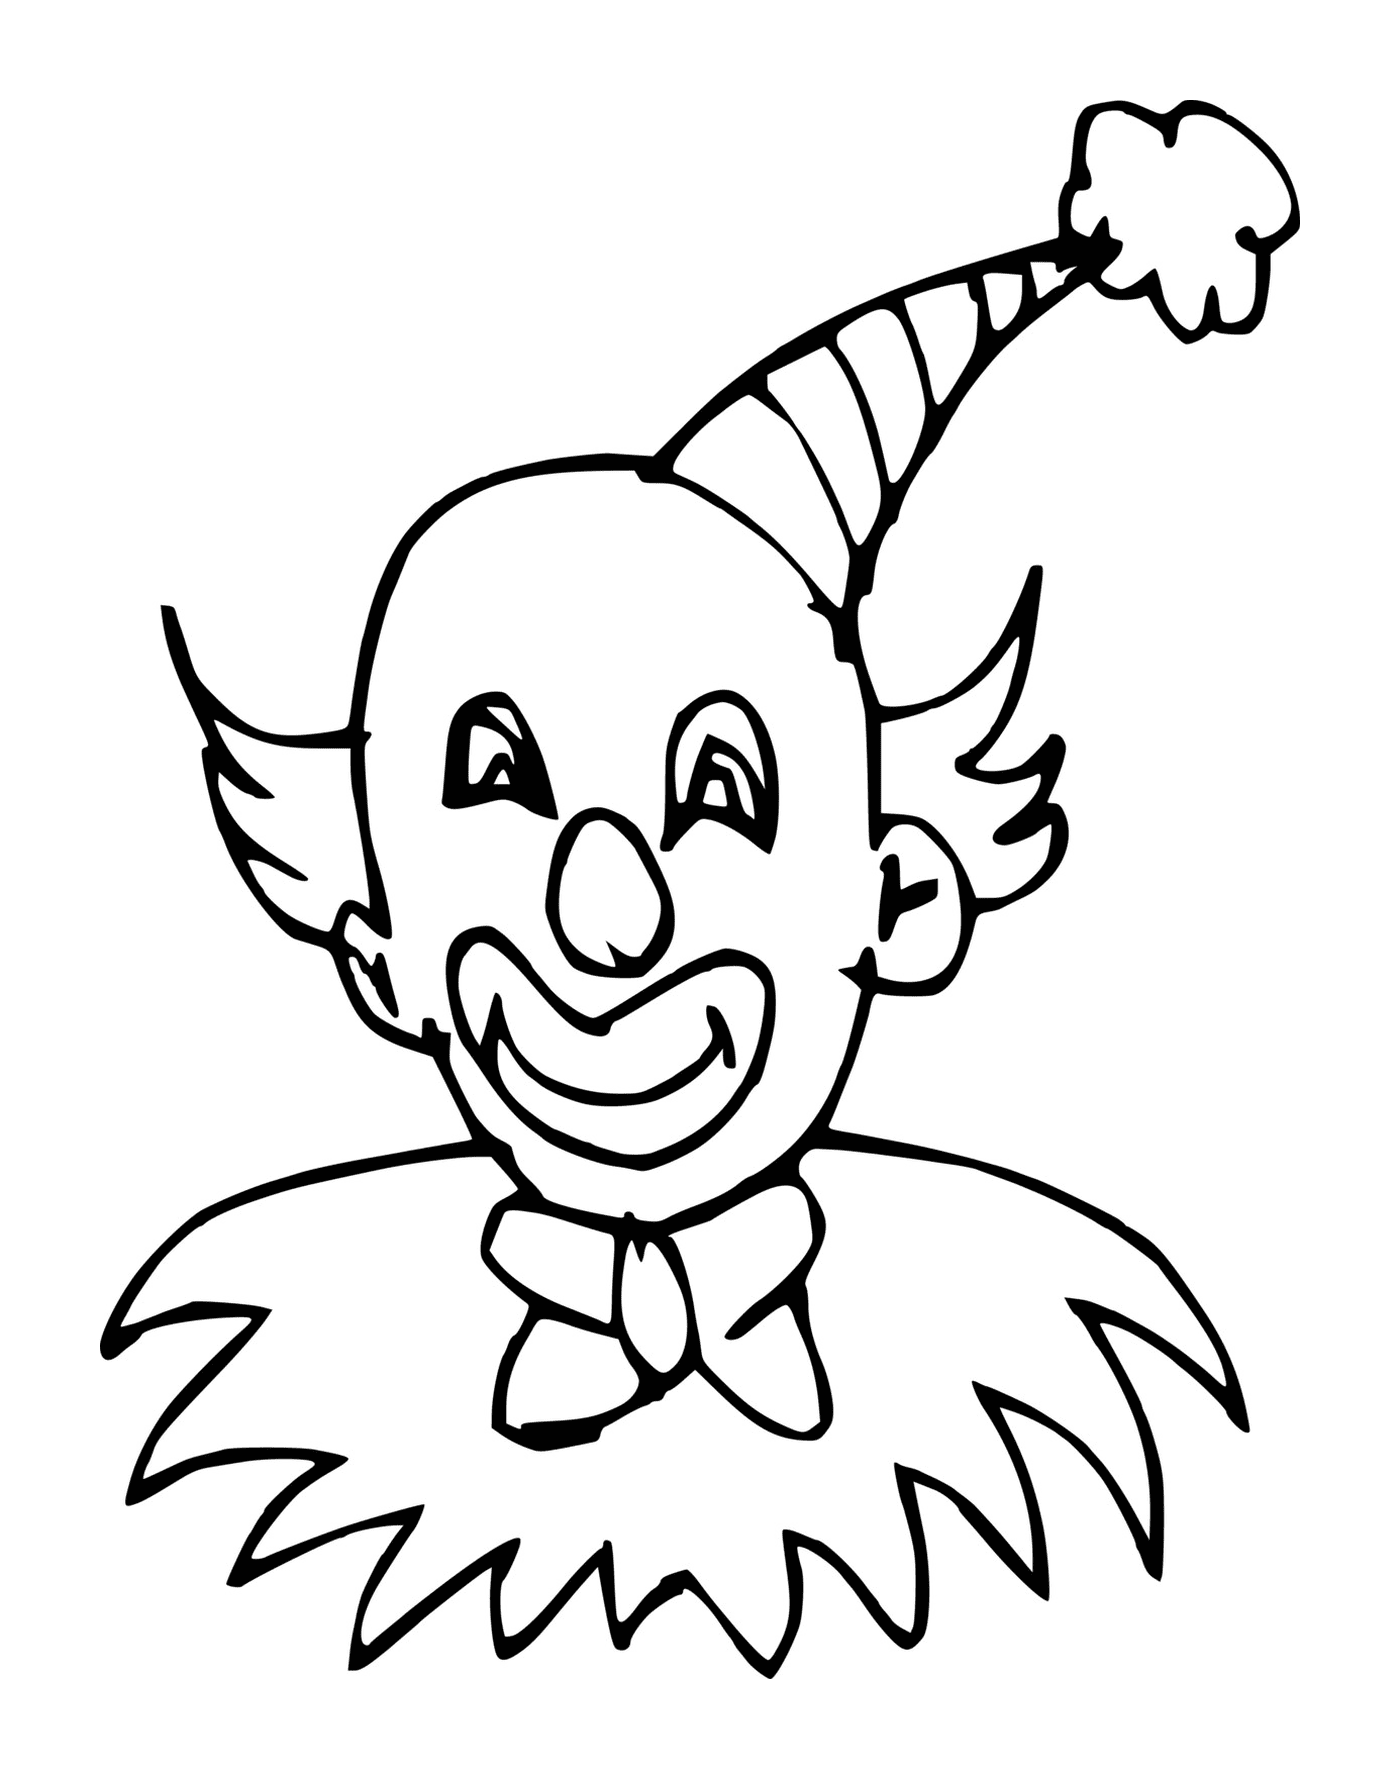  Funny bald clown with a hat 